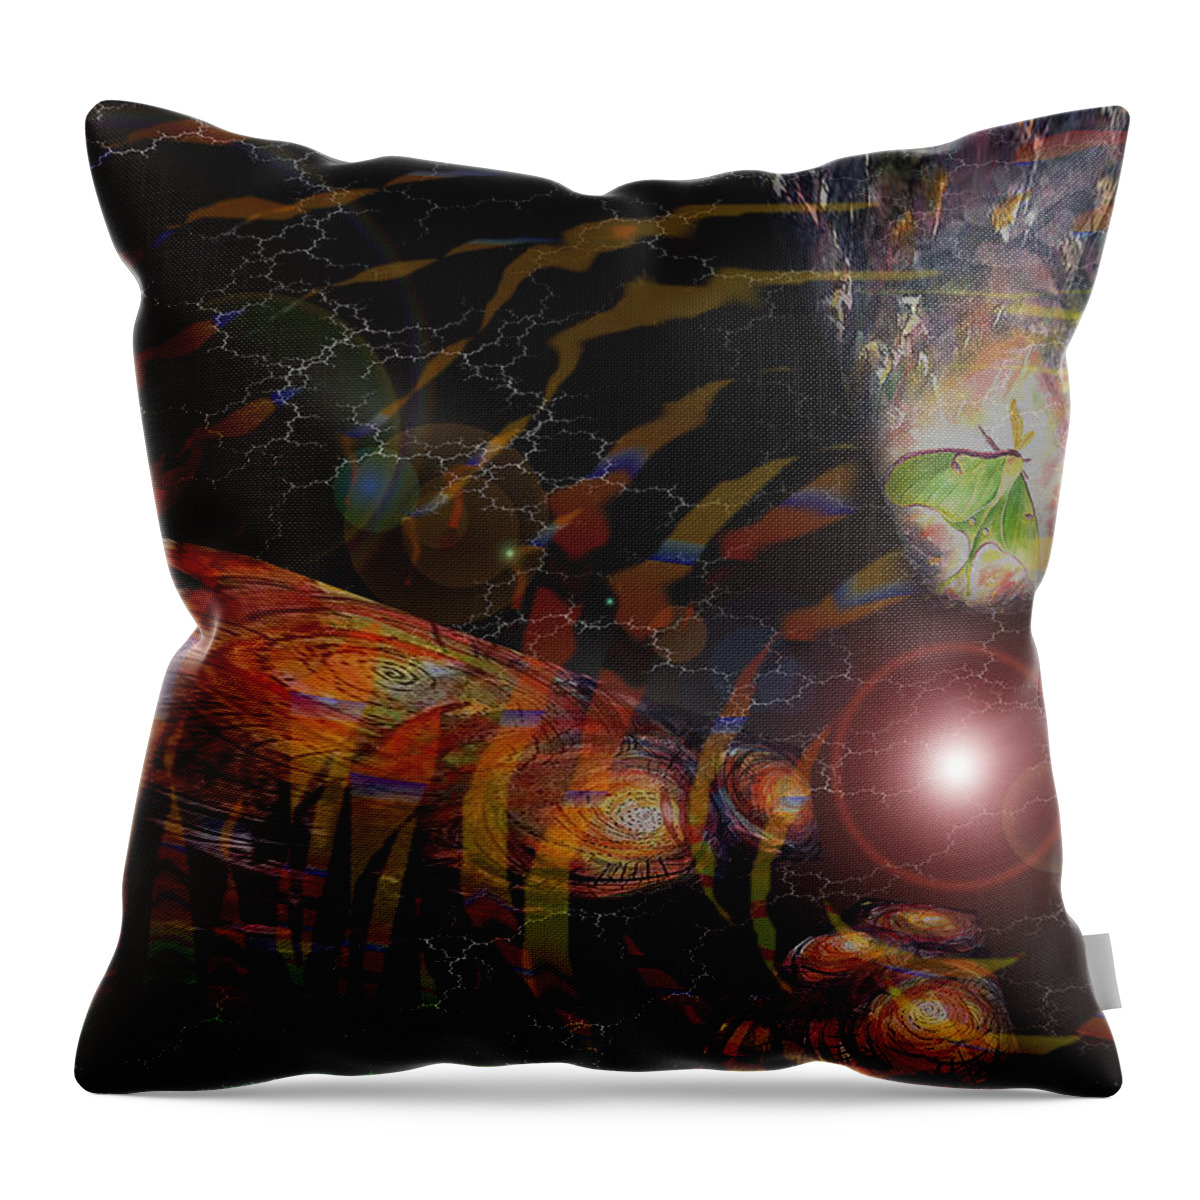 Digital Painting Throw Pillow featuring the digital art Source by Melinda Fawver